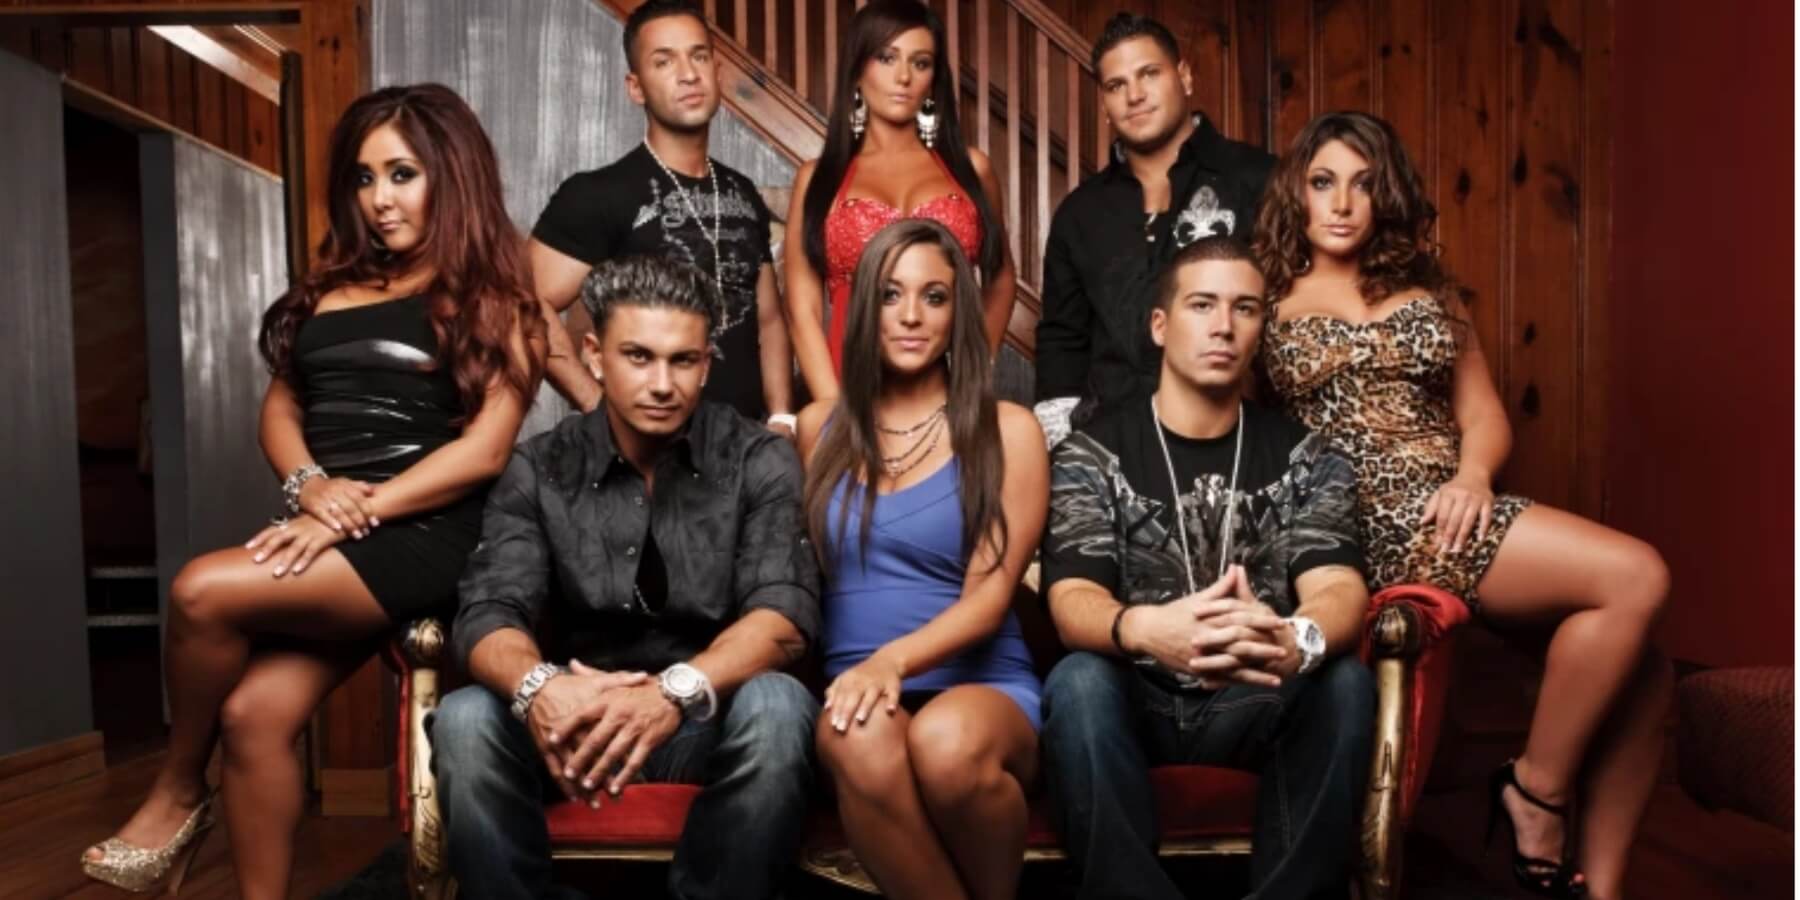 The cast of MTV's 'Jersey Shore' photographed in 2010.